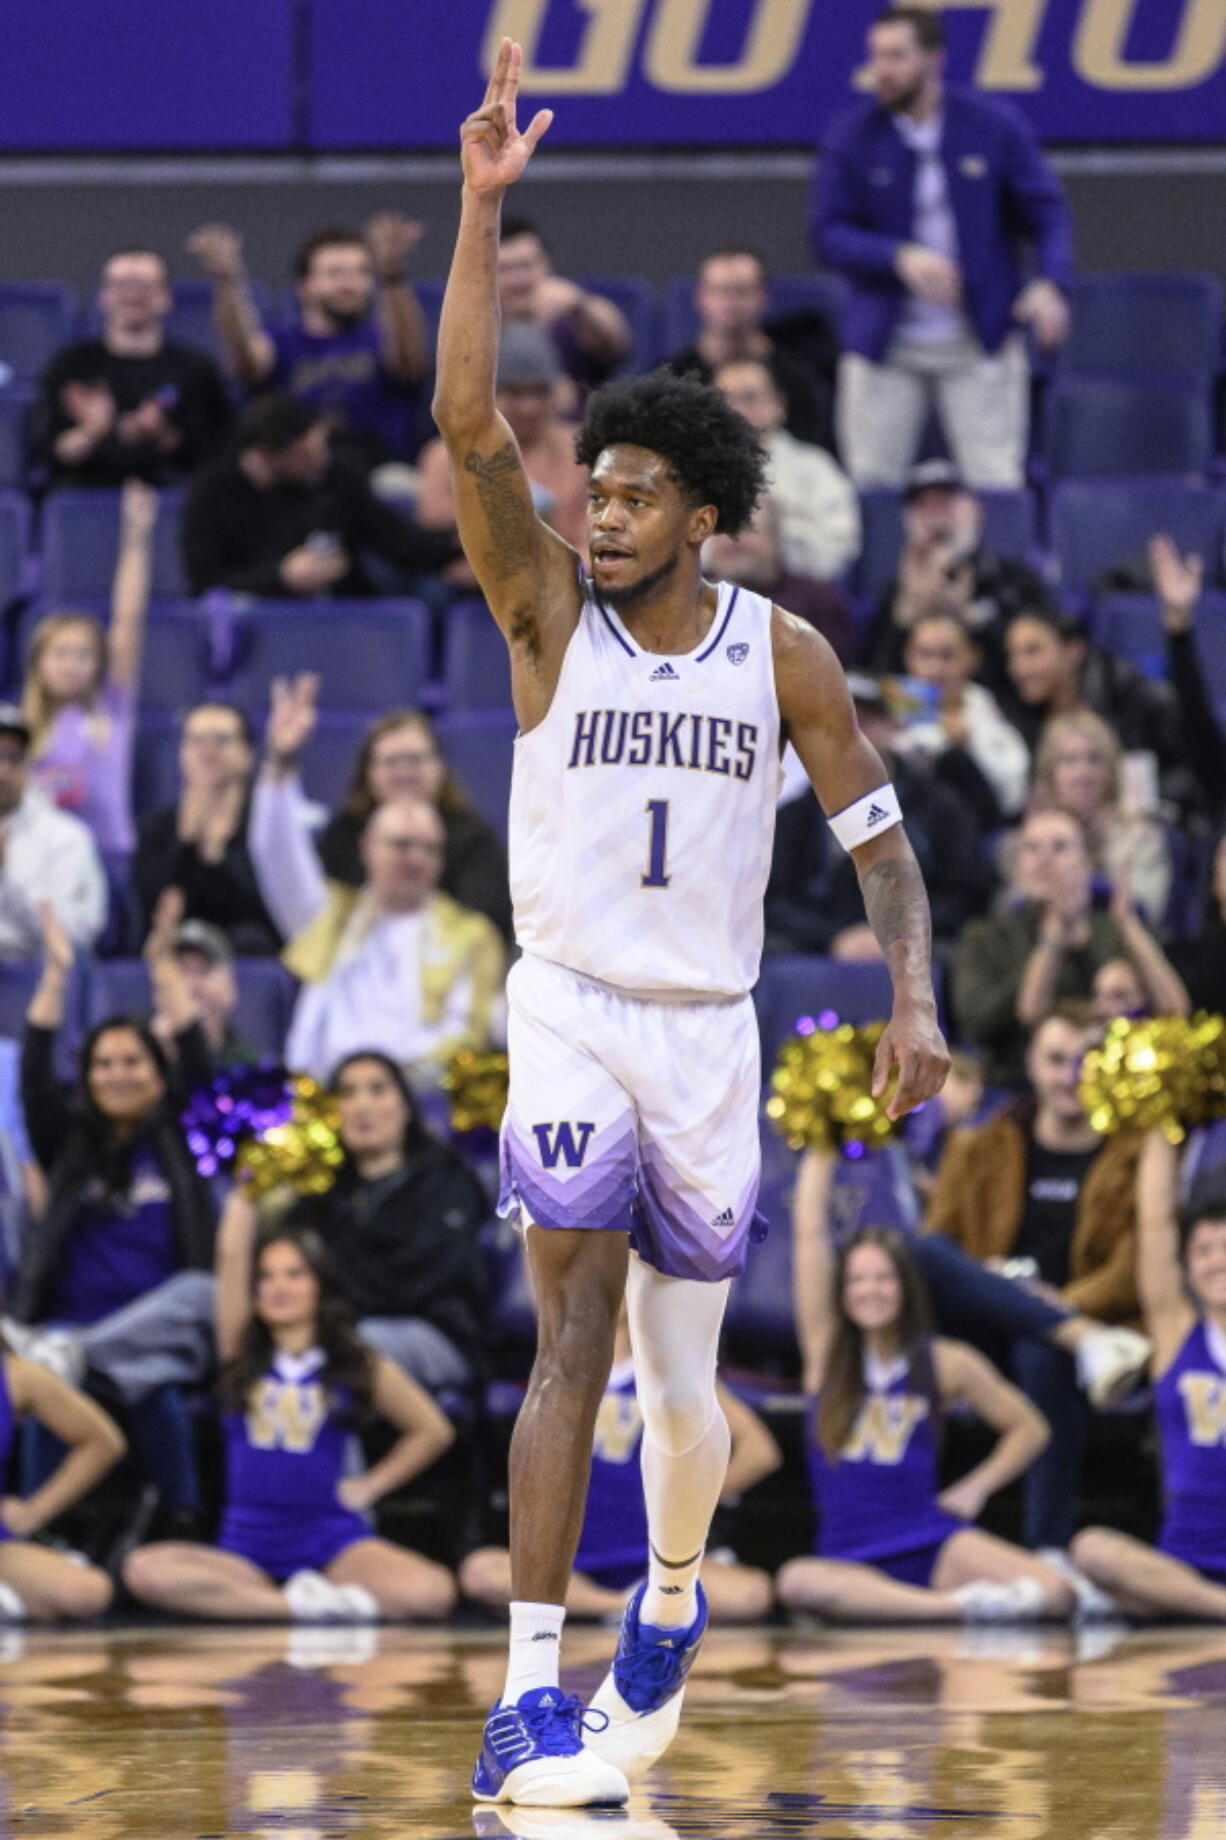 Washington's Keion Brooks celebrates after hitting a 3-pointer against Arizona State during the first half of an NCAA college basketball game Thursday, Jan. 26, 2023, in Seattle.